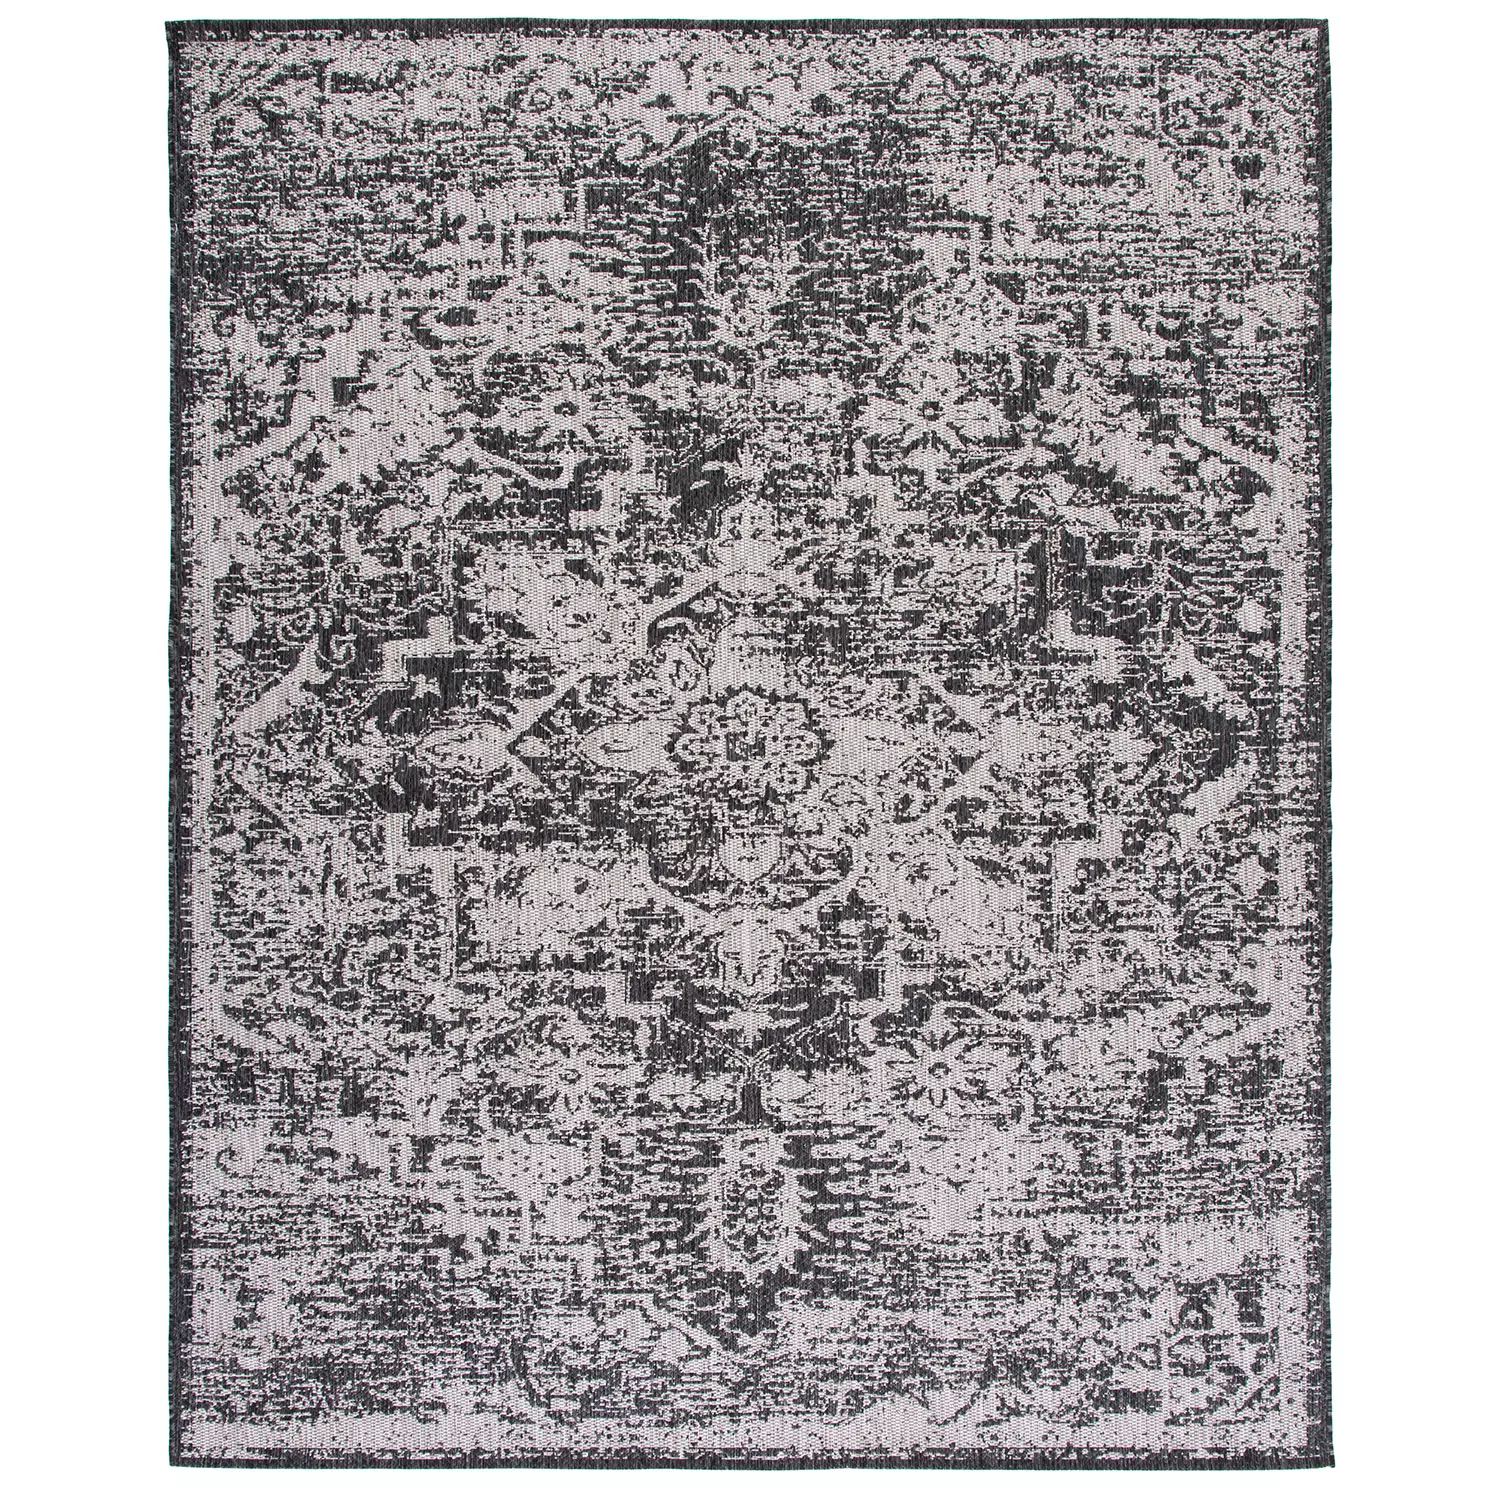 Safavieh Resort 8' x 10' Outdoor Rug Collection - Fontaine | Sam's Club